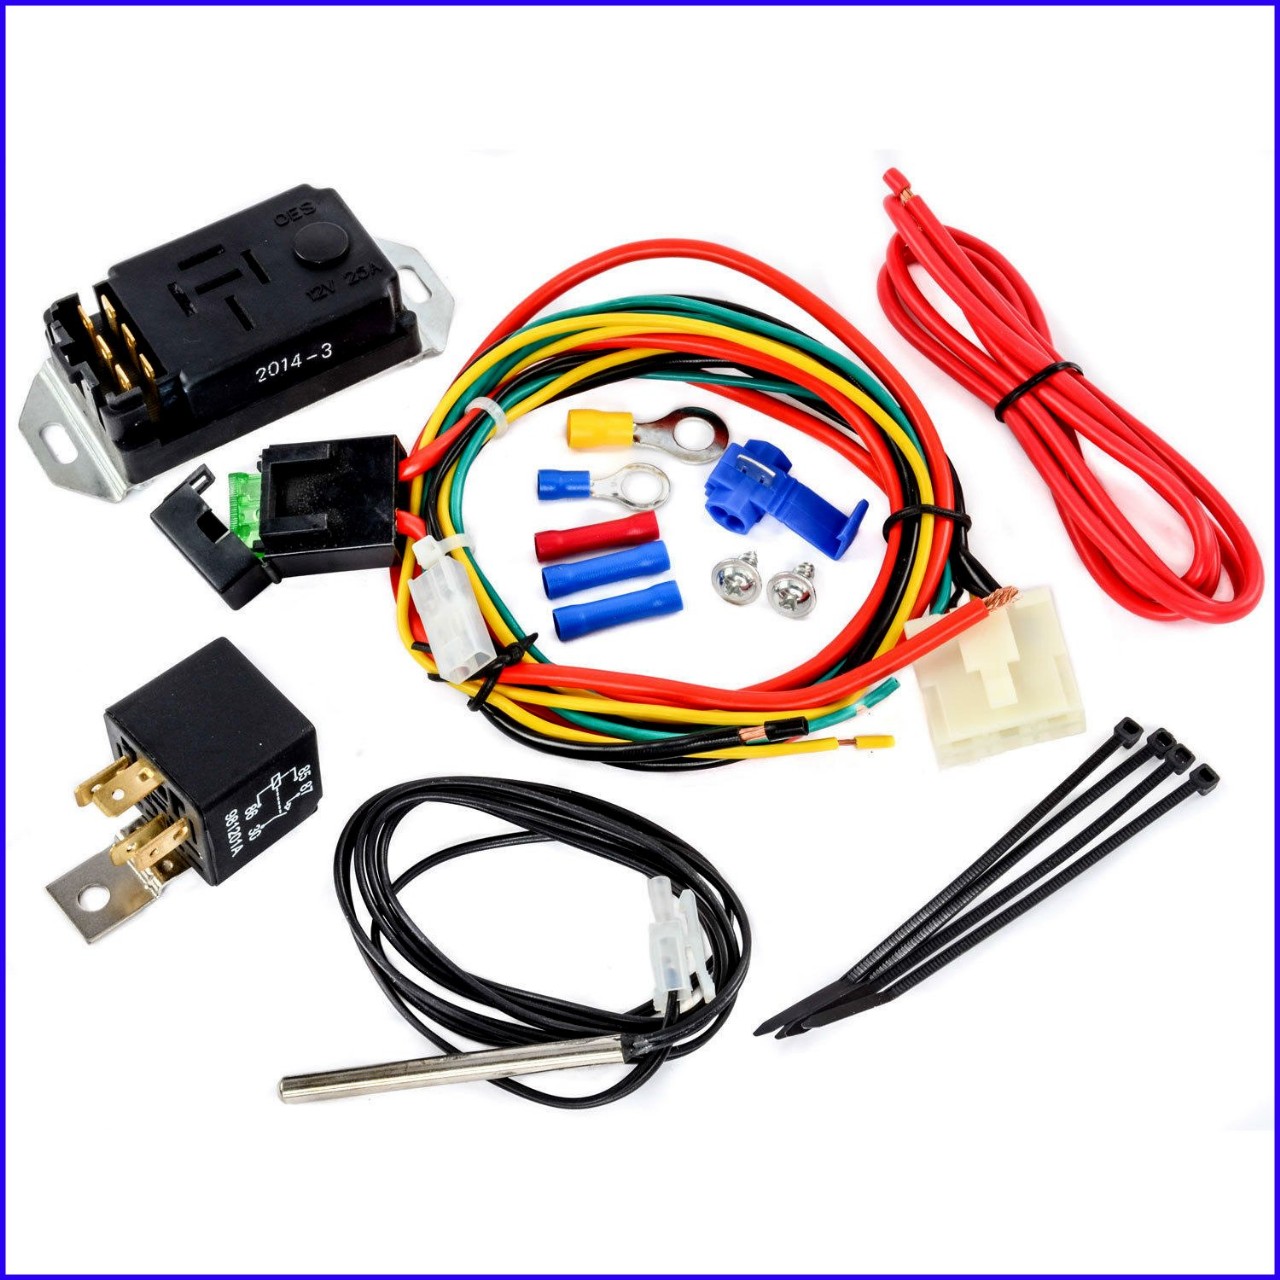 Automotive Engine Adjustable Electric Cooling Fan Controller Kit Complete New Design And Durable Car